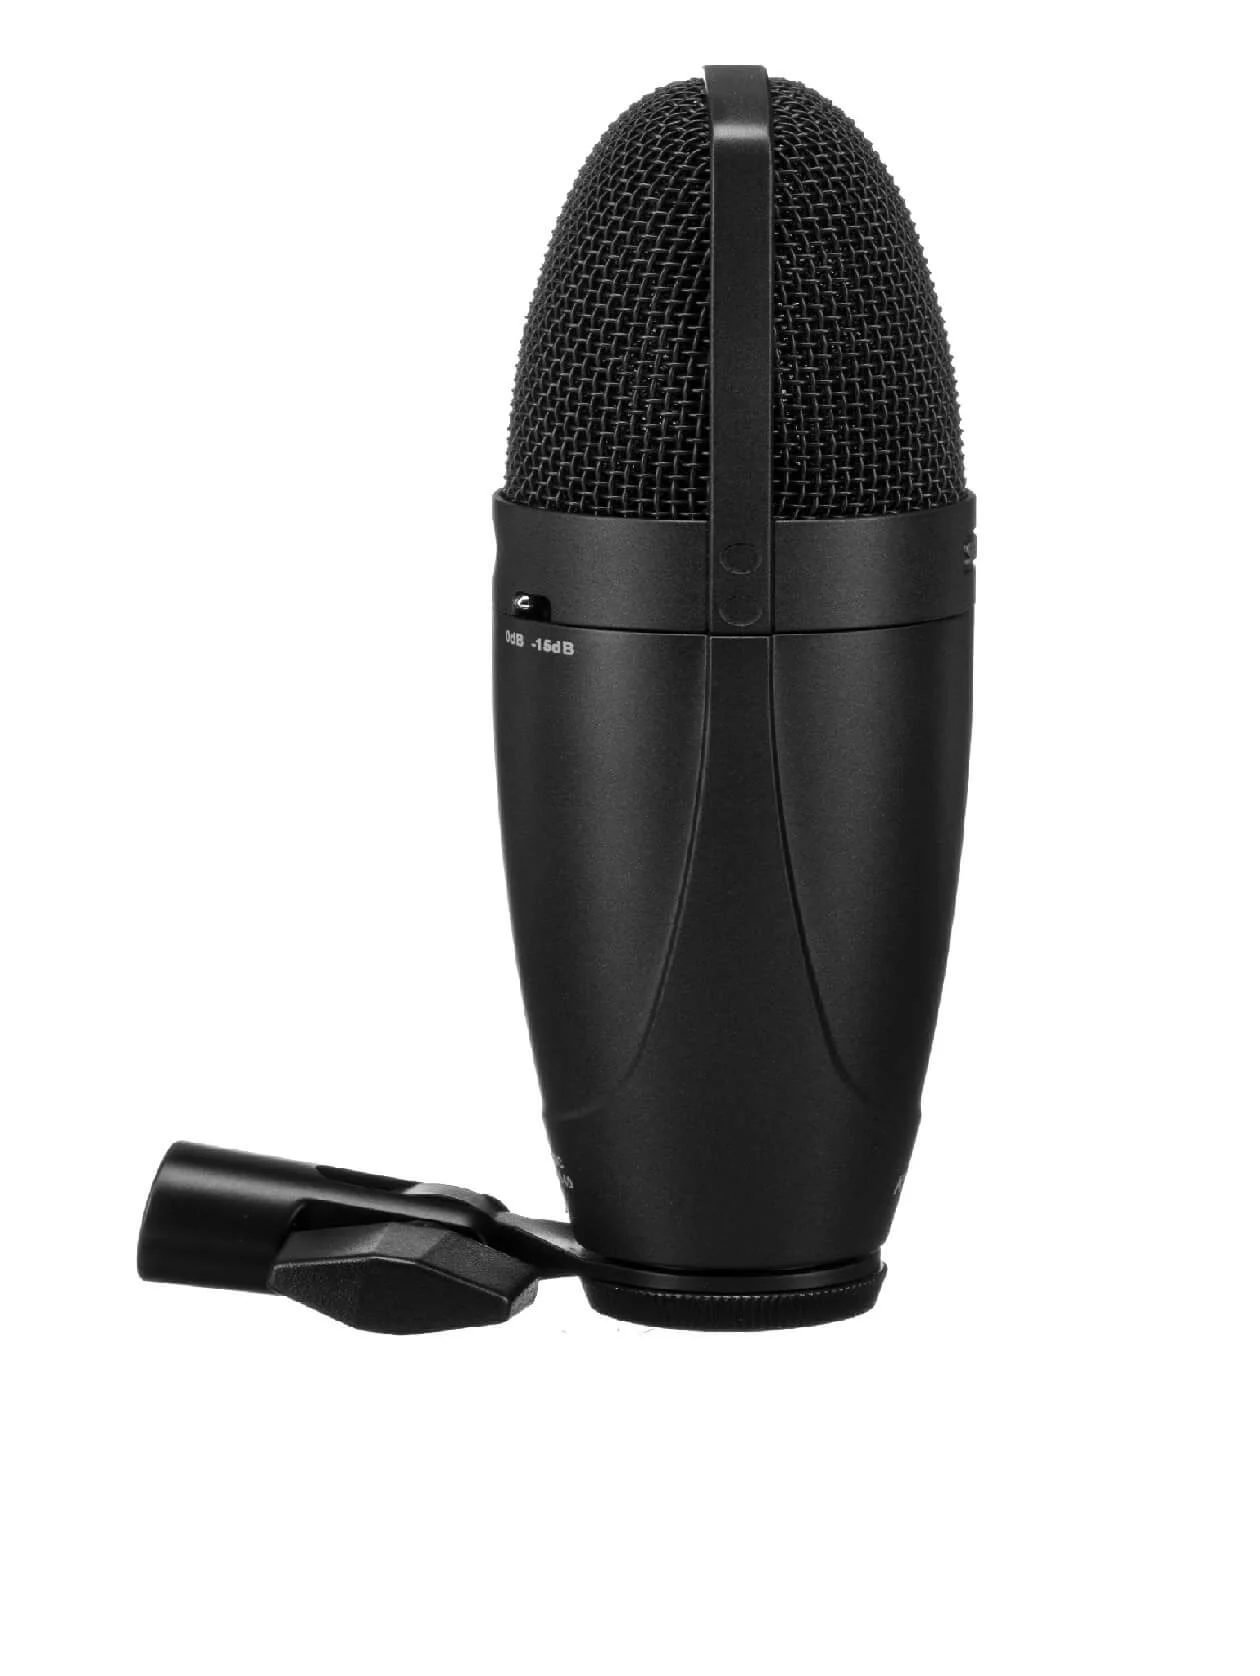 Shure KSM32/CG Embossed Single-Diaphragm Cardioid Condenser Stage Microphone